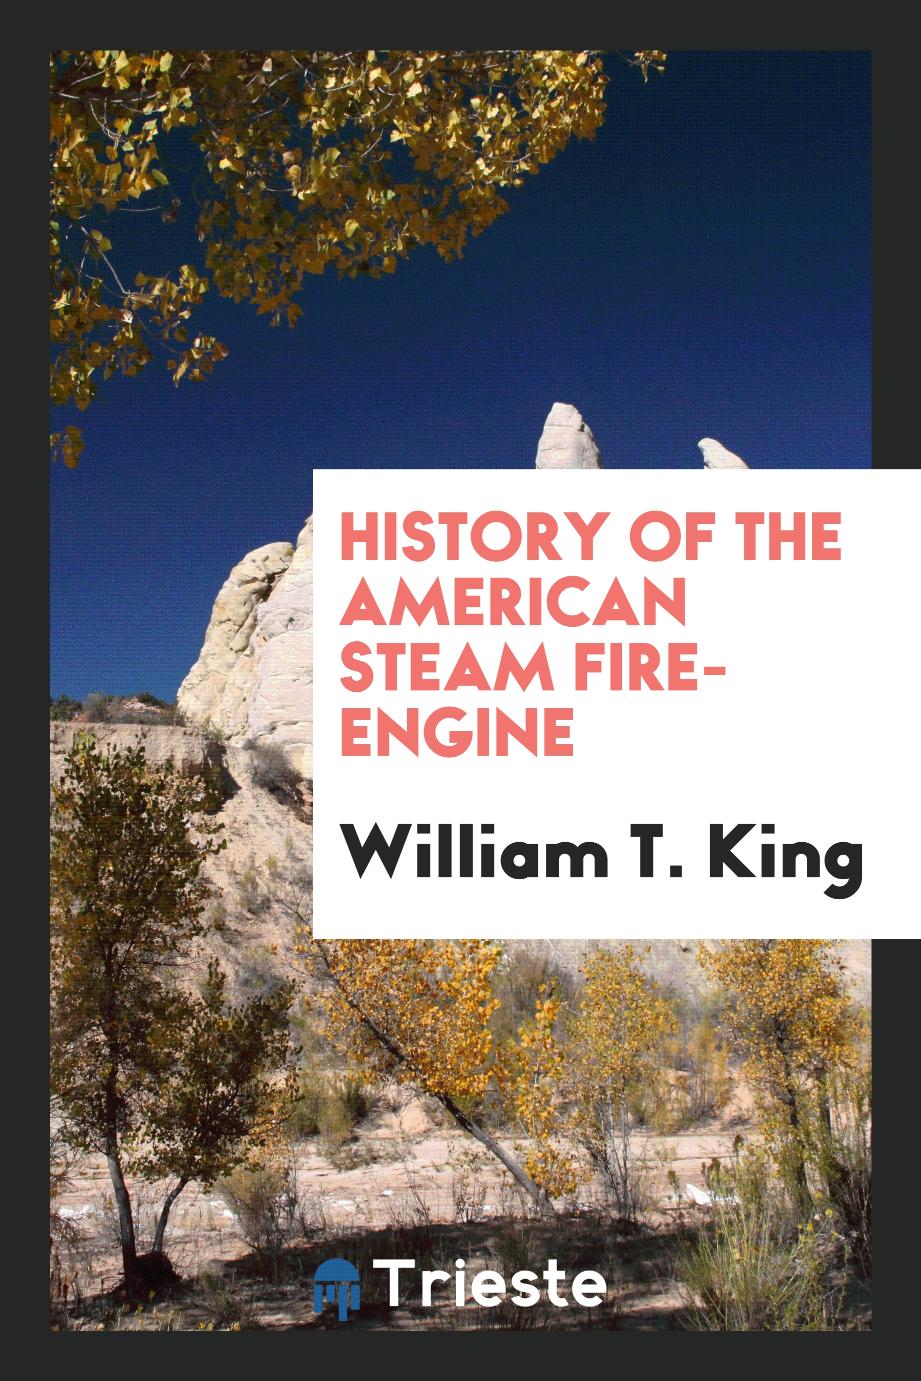 William T. King - History of the American Steam Fire-Engine